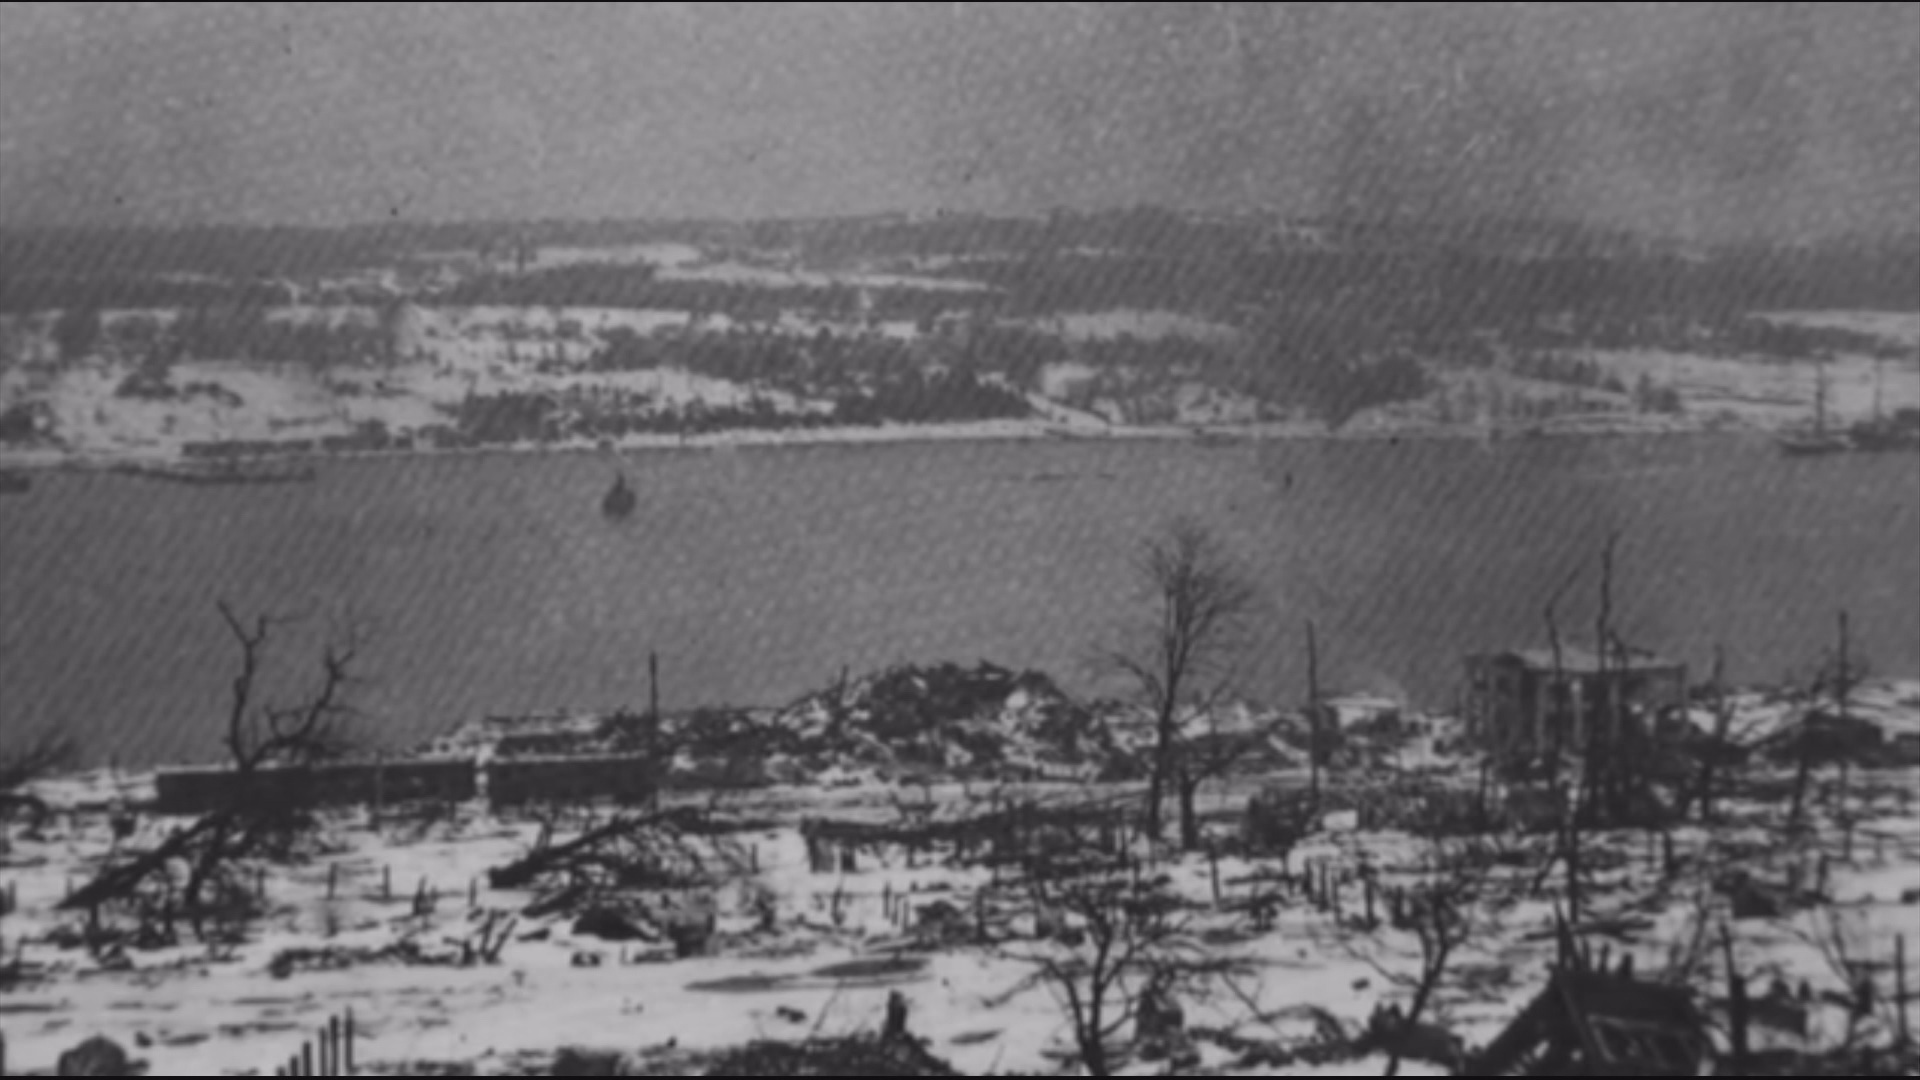 The Halifax Explosion: What Is Courage? 